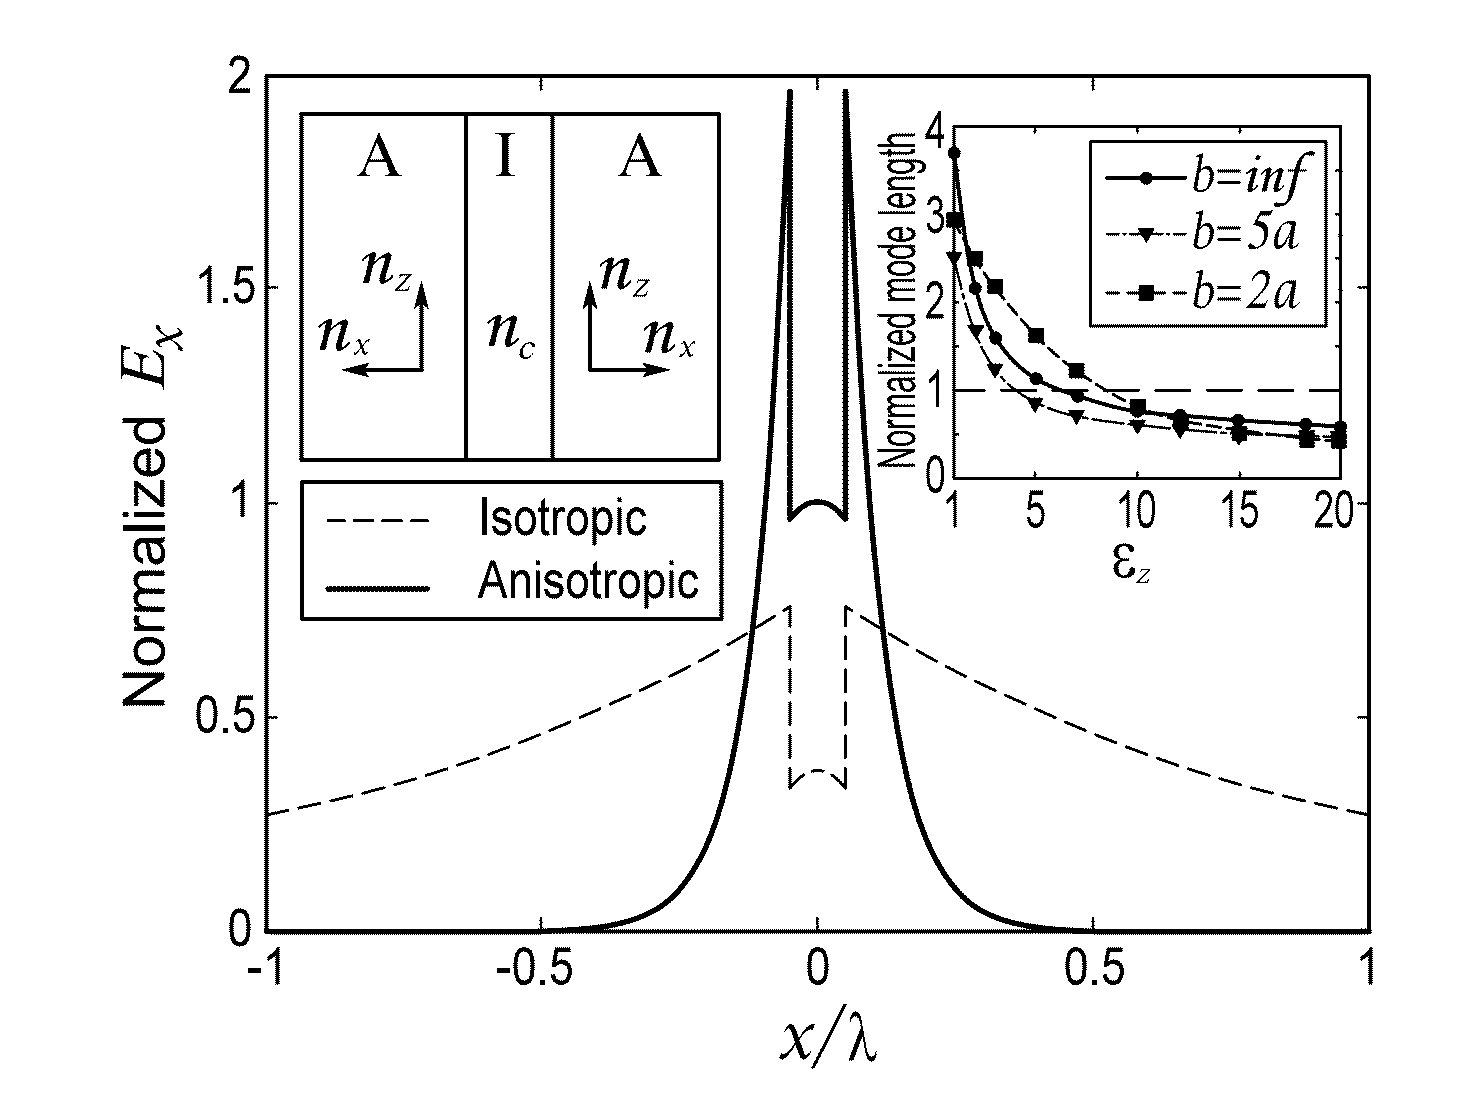 Light confining devices using all-dielectric metamaterial cladding